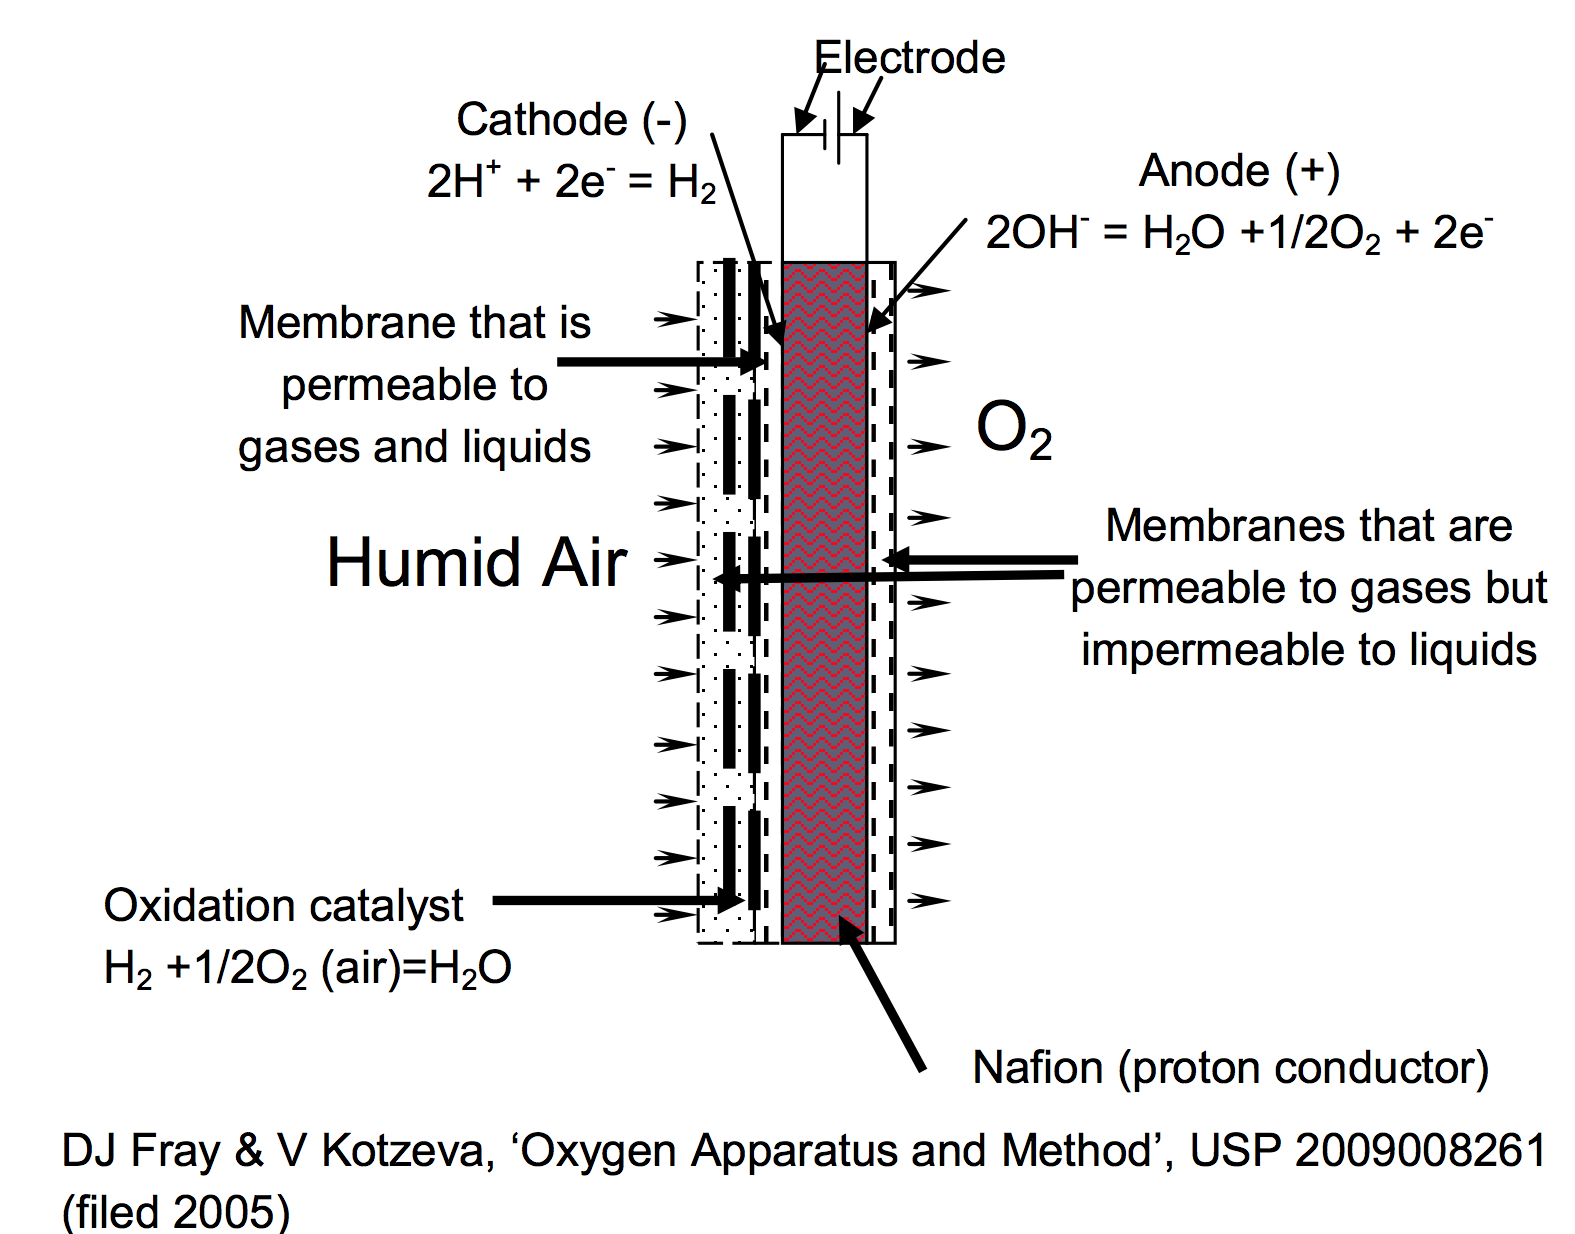 Figure 1. Diagram of Natrox™ oxygen generator showing, on the right, the electrochemical cell that produces the oxygen from water in the membrane and the oxidation catalyst, on the left, where the hydrogen is reacted with oxygen from the air, to produce water that is returned to the membrane.